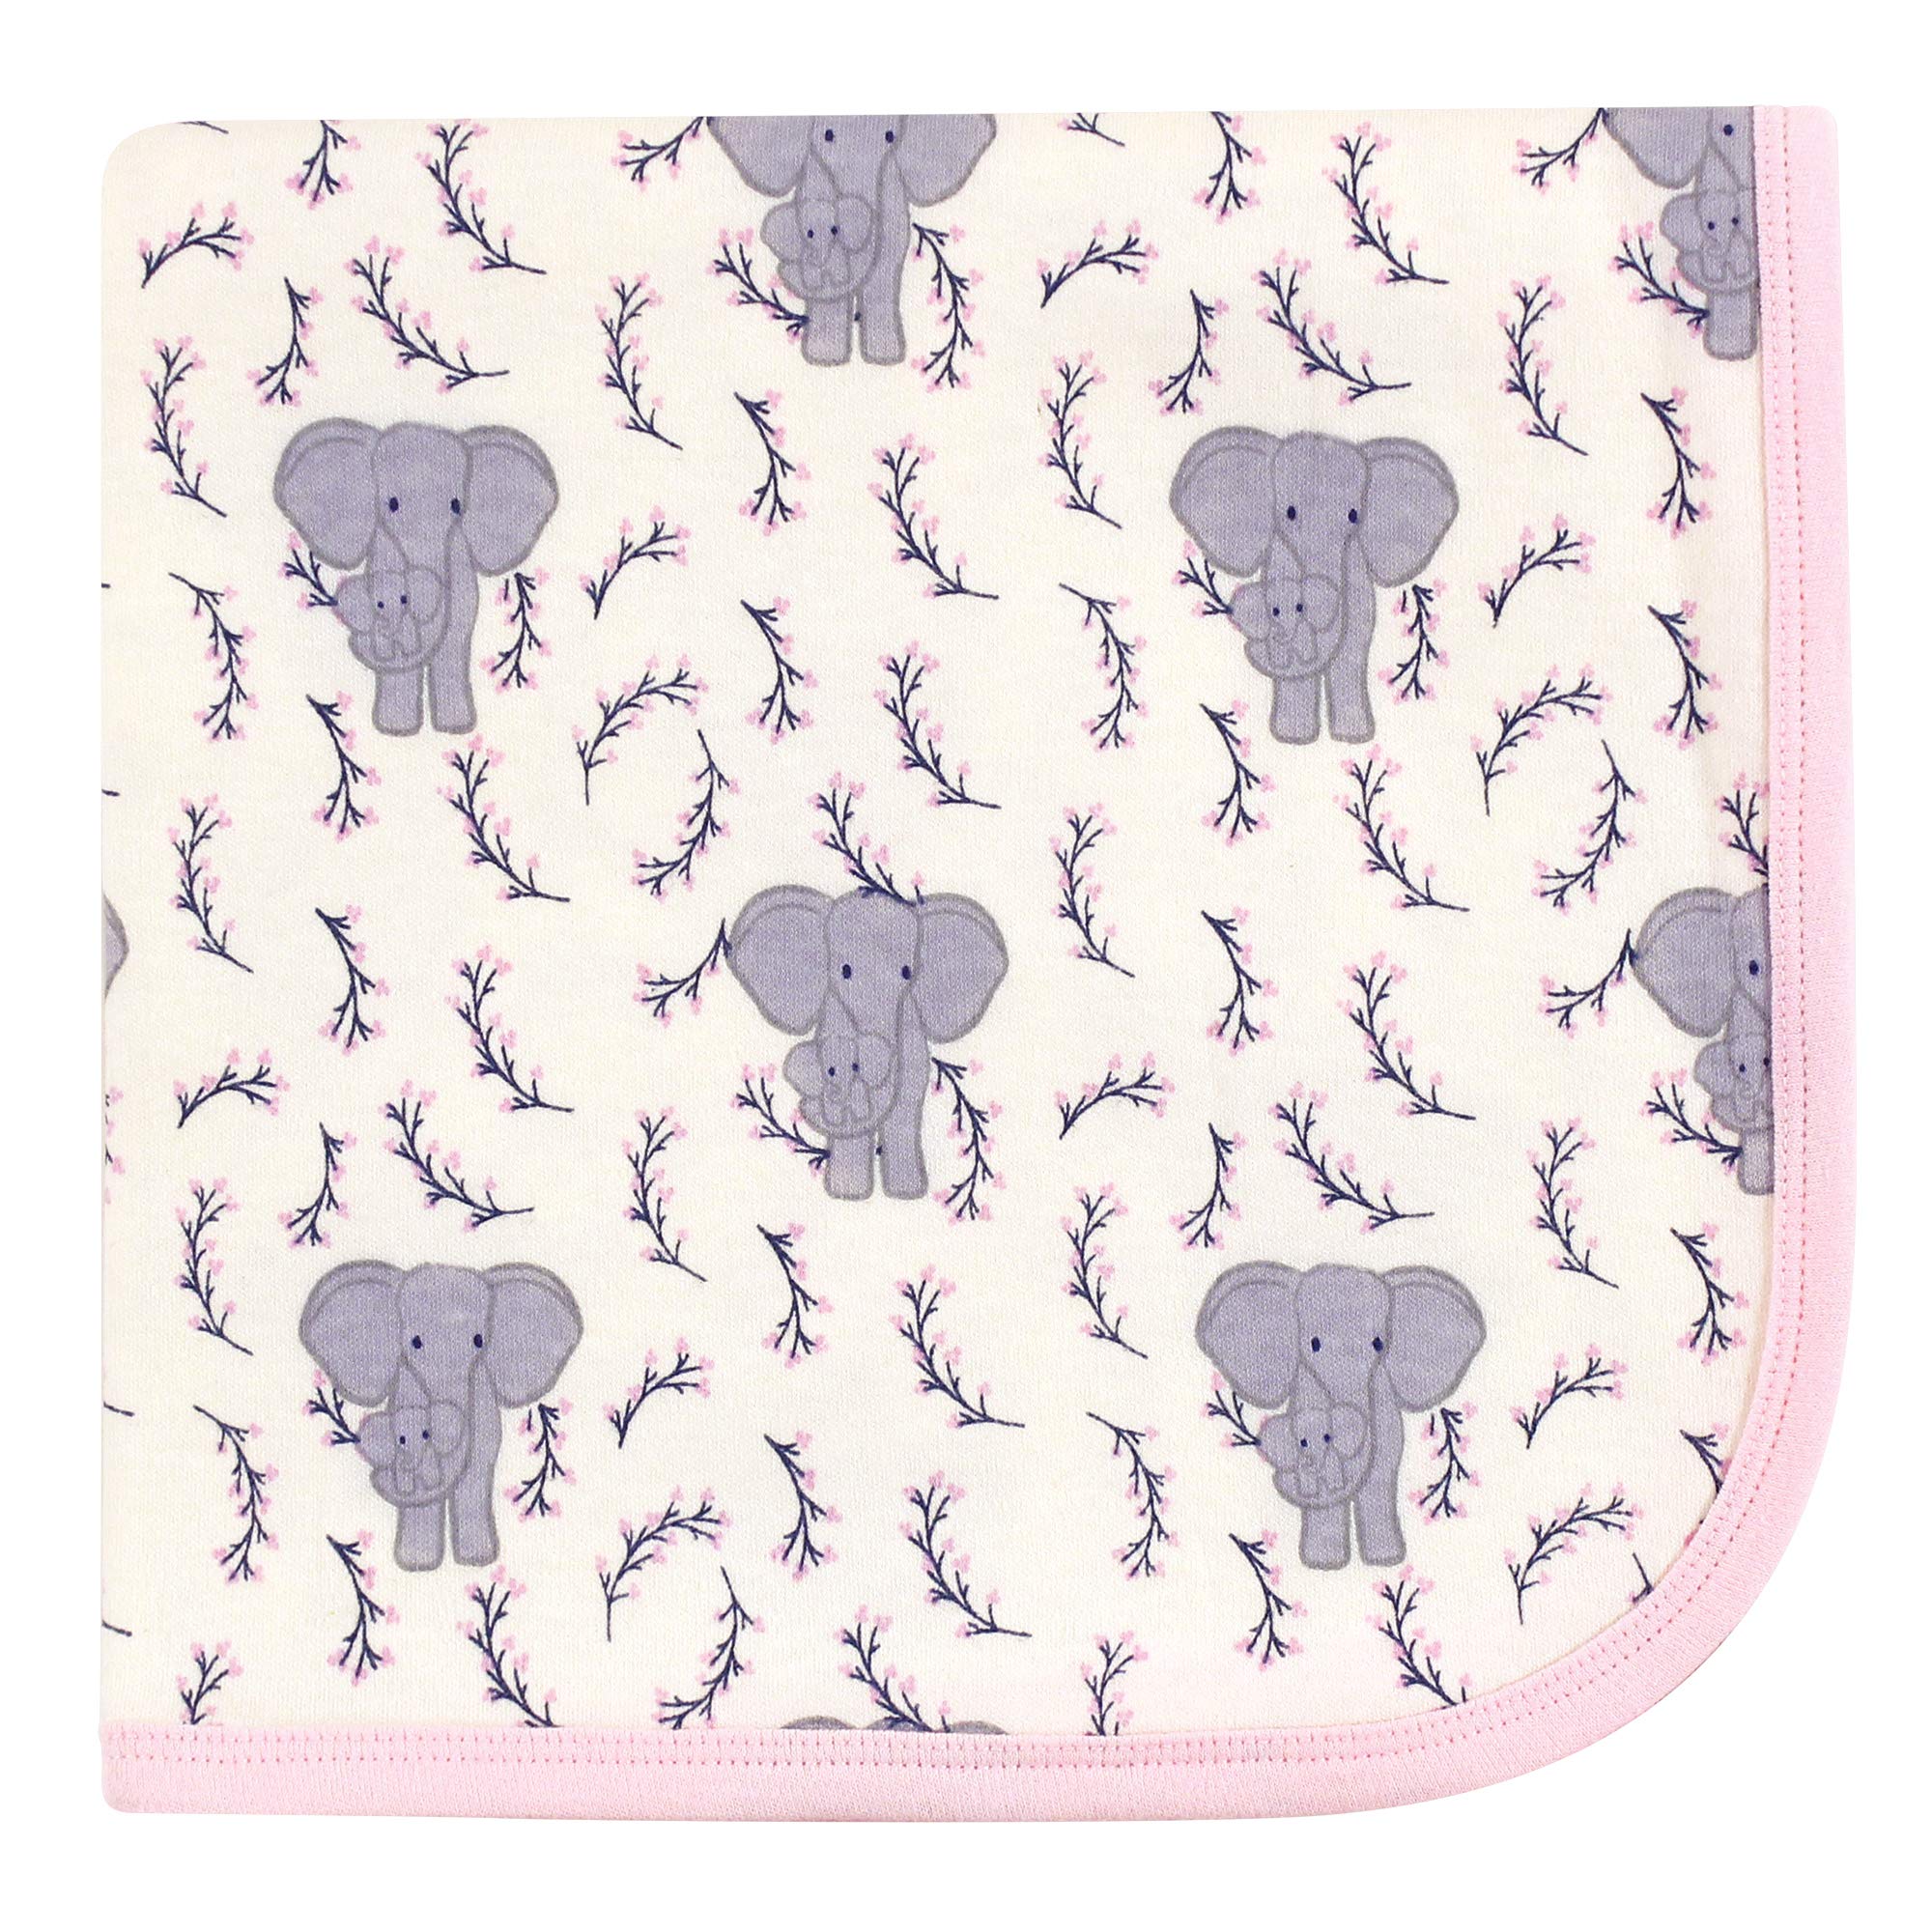 Touched by Nature Unisex Baby Organic cotton Swaddle, Receiving and Multi-purpose Blanket, Pink Elephant, One Size